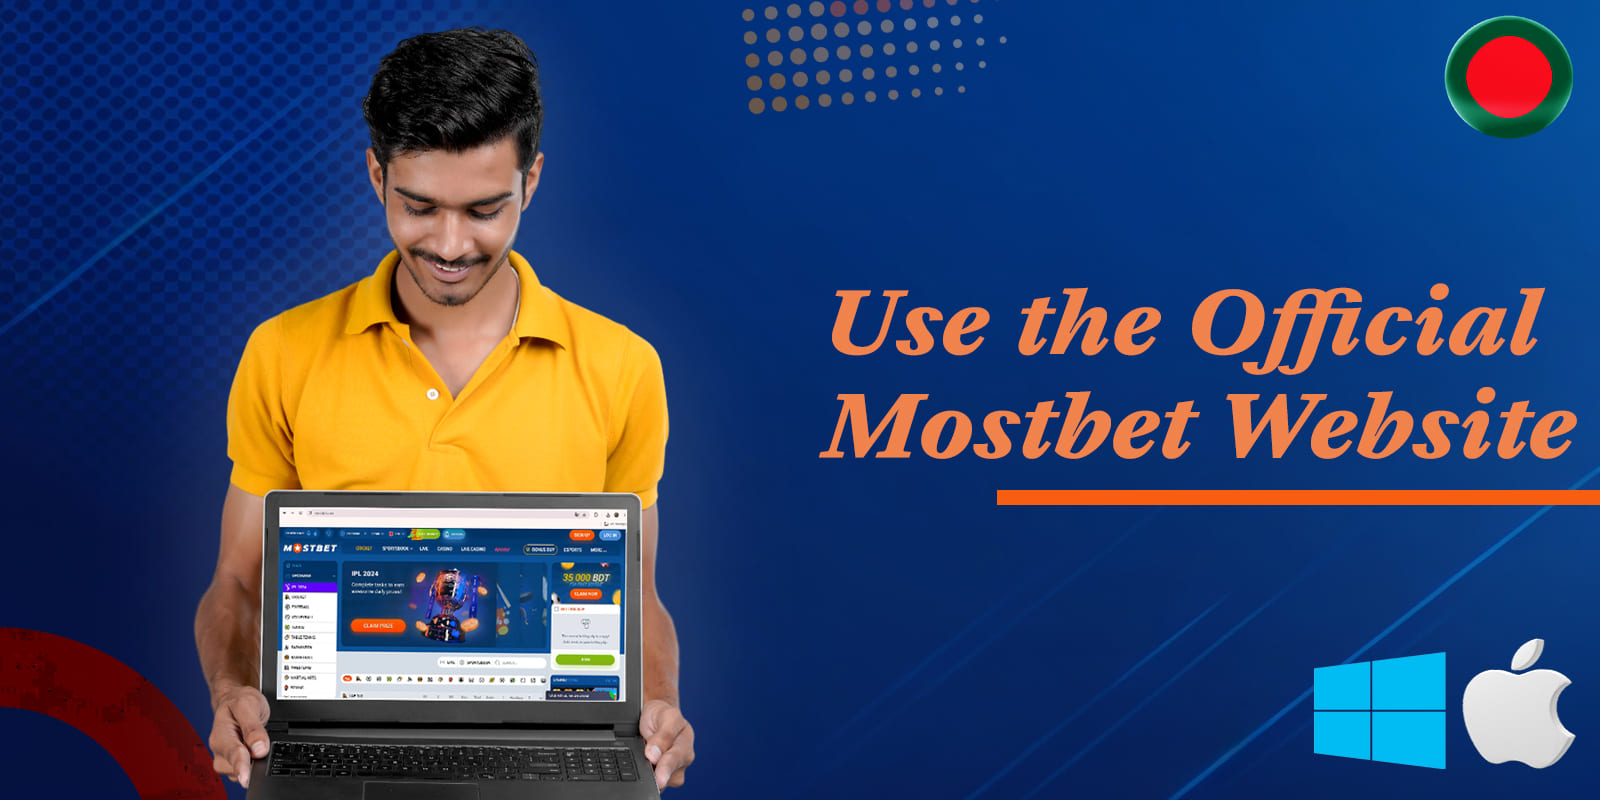 The official Mostbet website